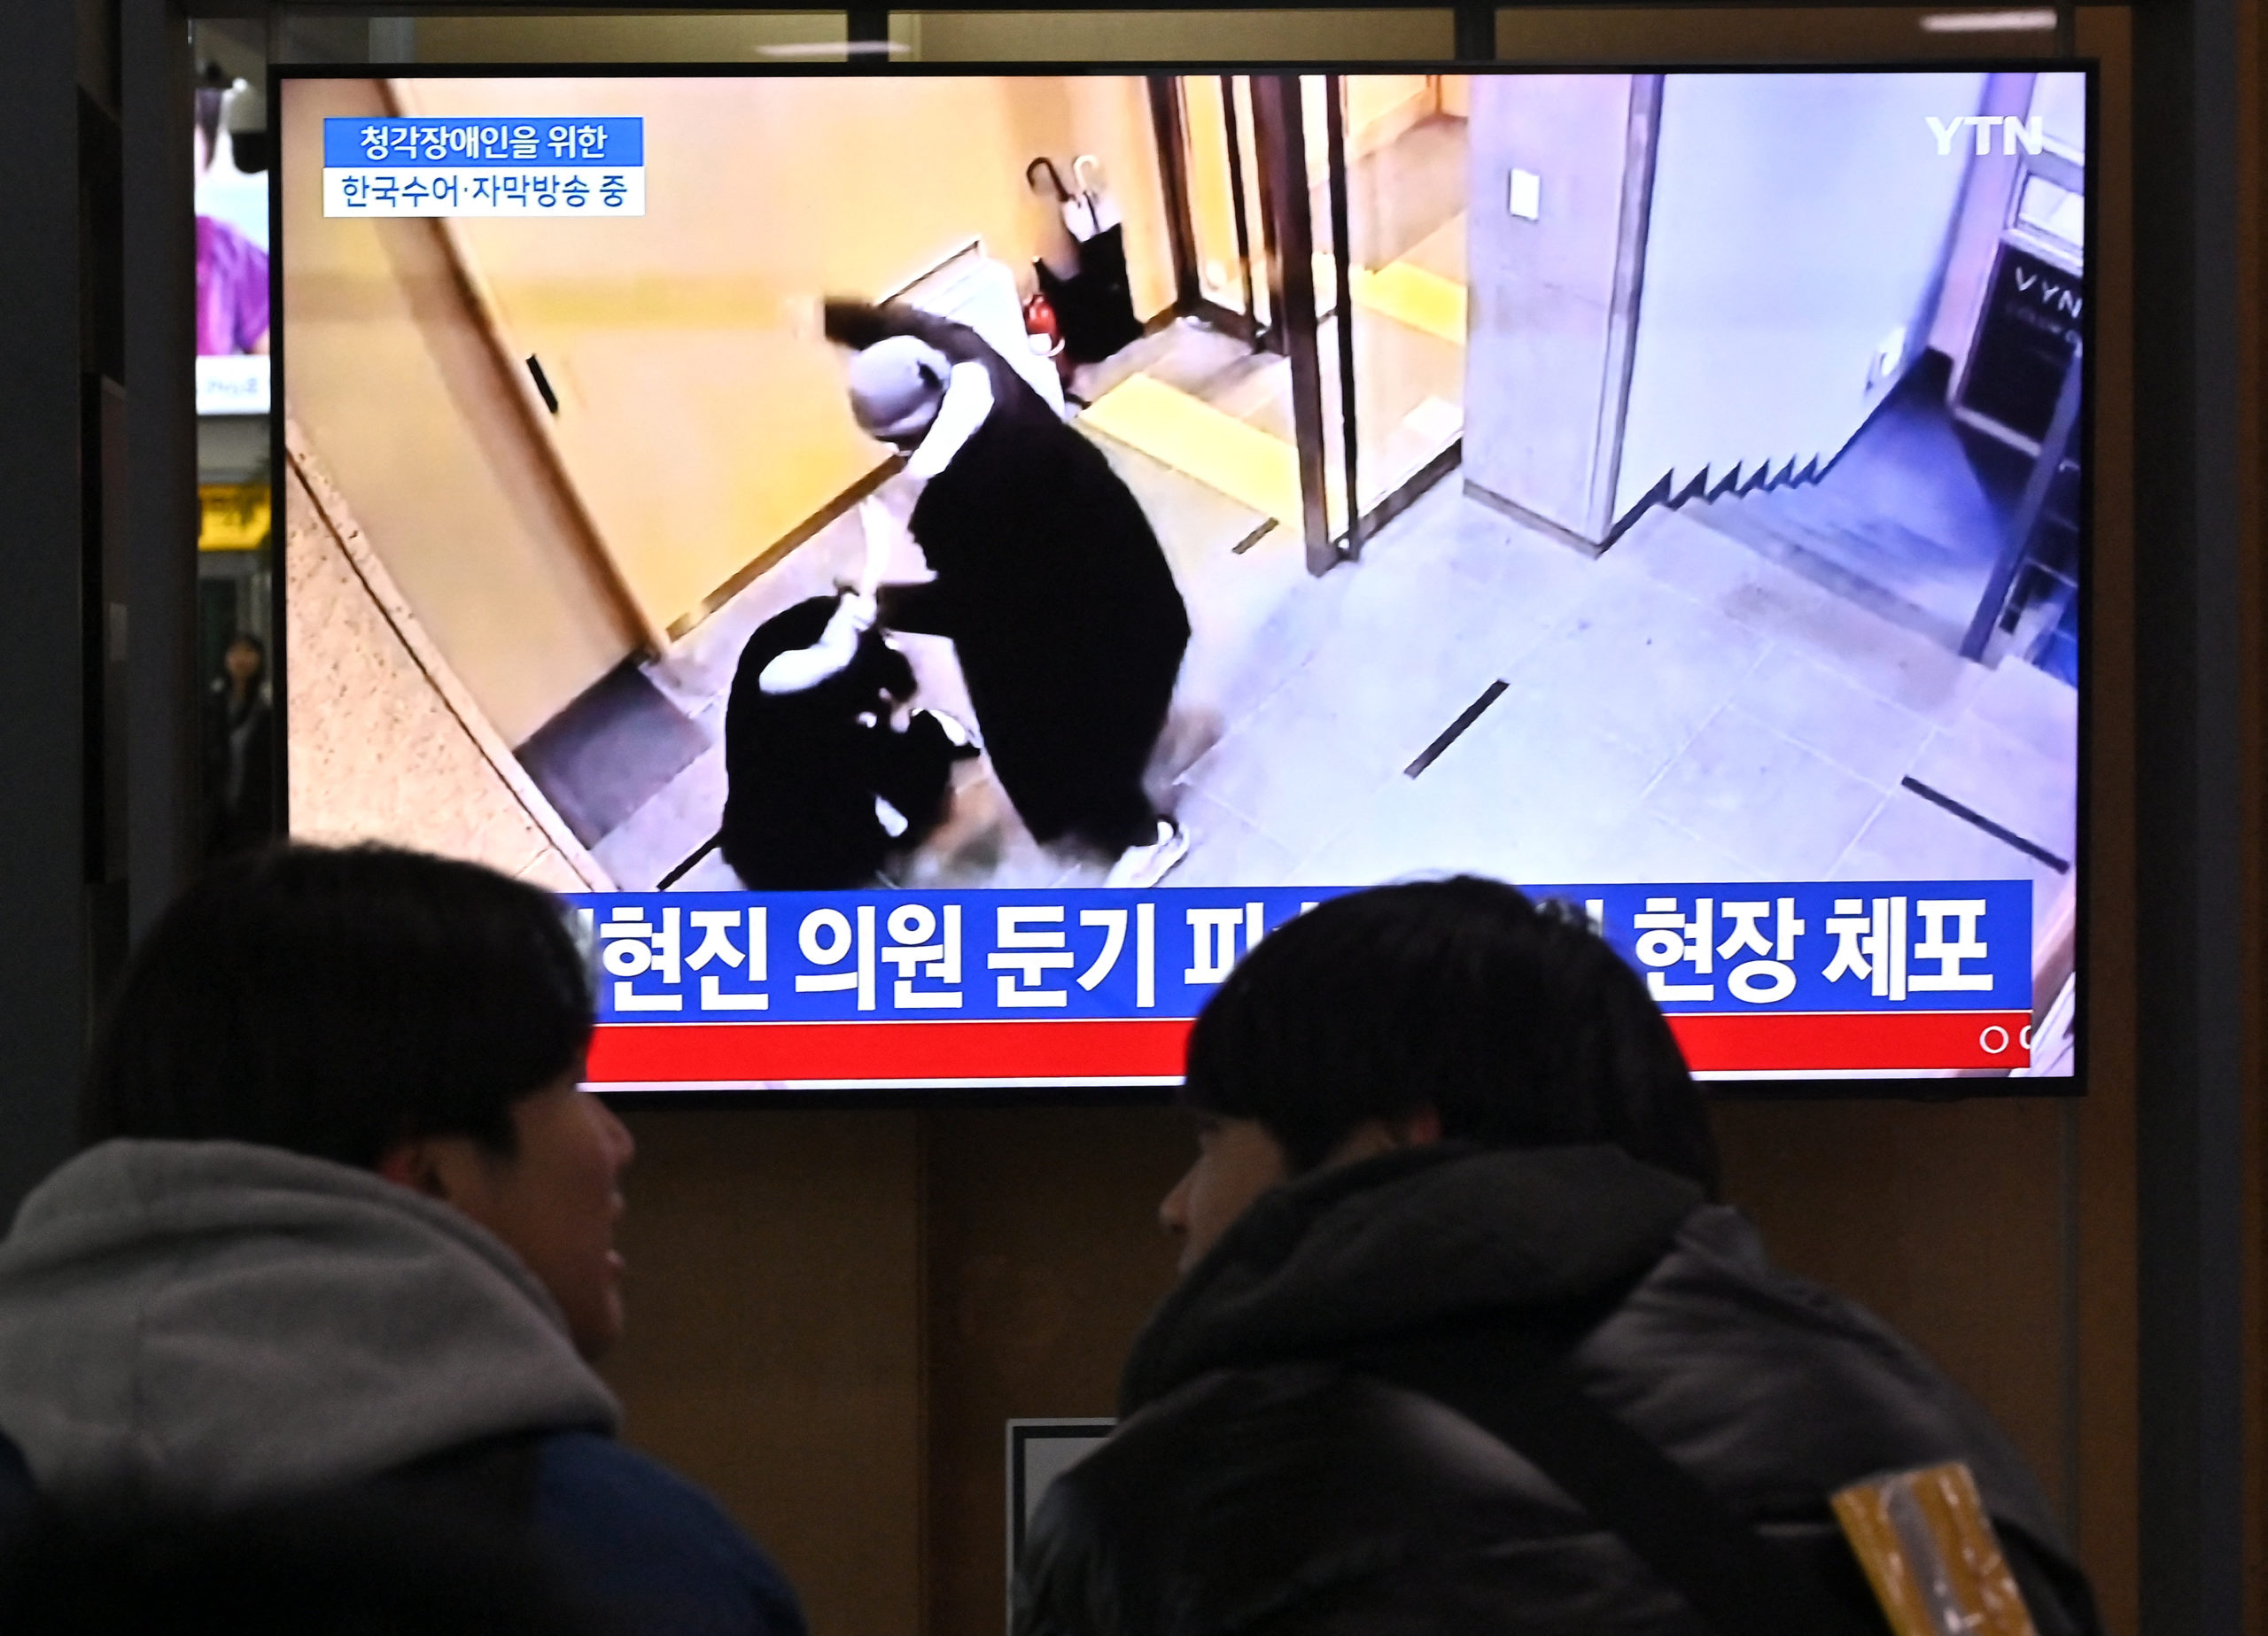 People watch a television screen showing a news broadcast with a closed-circuit television footage of the scene where South Korean ruling People Power Party's lawmaker Bae Hyun-jin being assaulted in Gangnam district, at a railway station in Seoul on January 25, 2024. (Photo by JUNG YEON-JE/AFP via Getty Images)